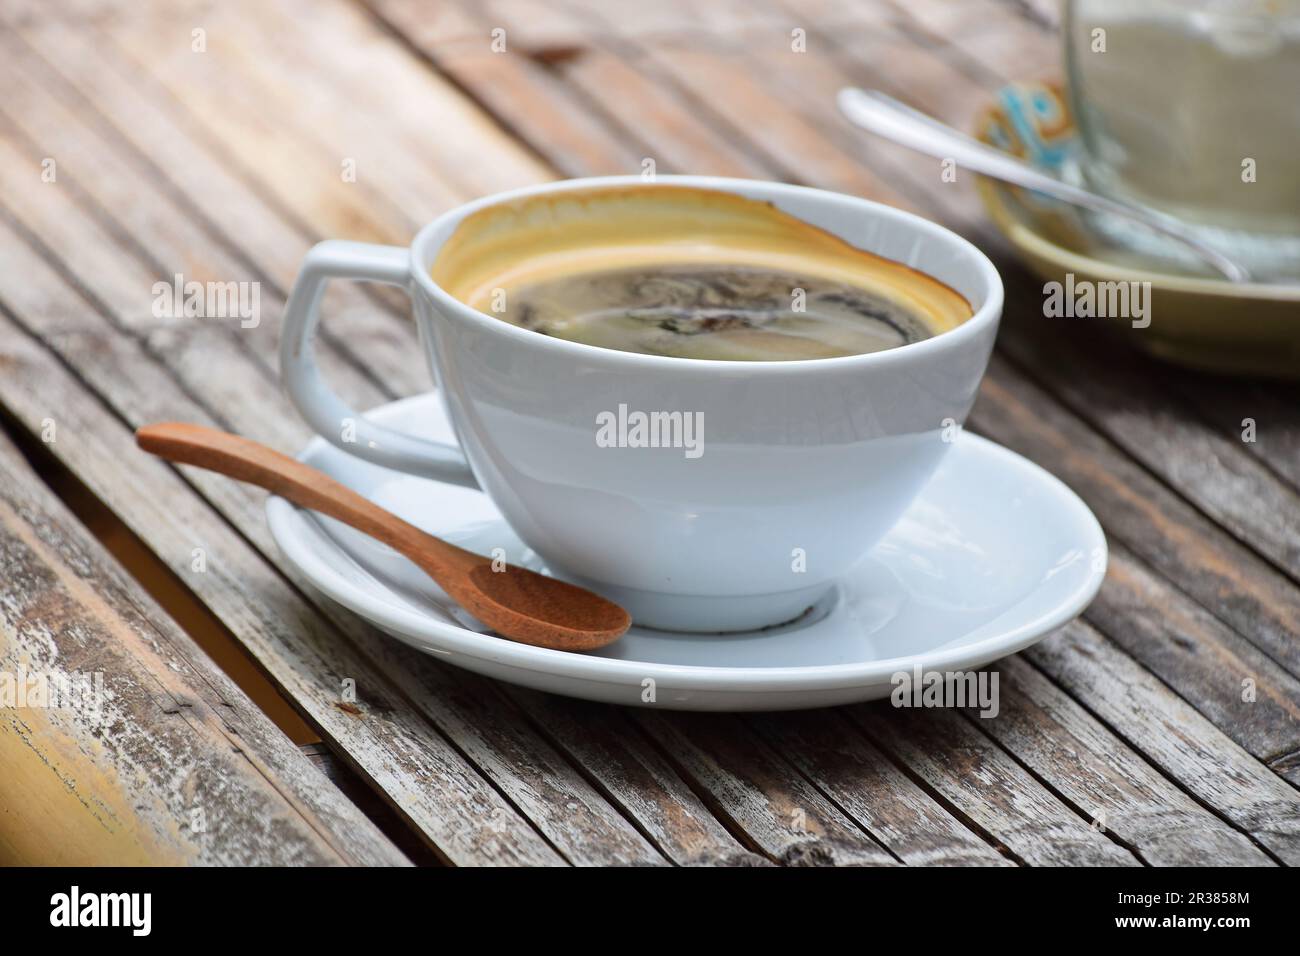 One full cup of Americano coffee on bamboo table Stock Photo